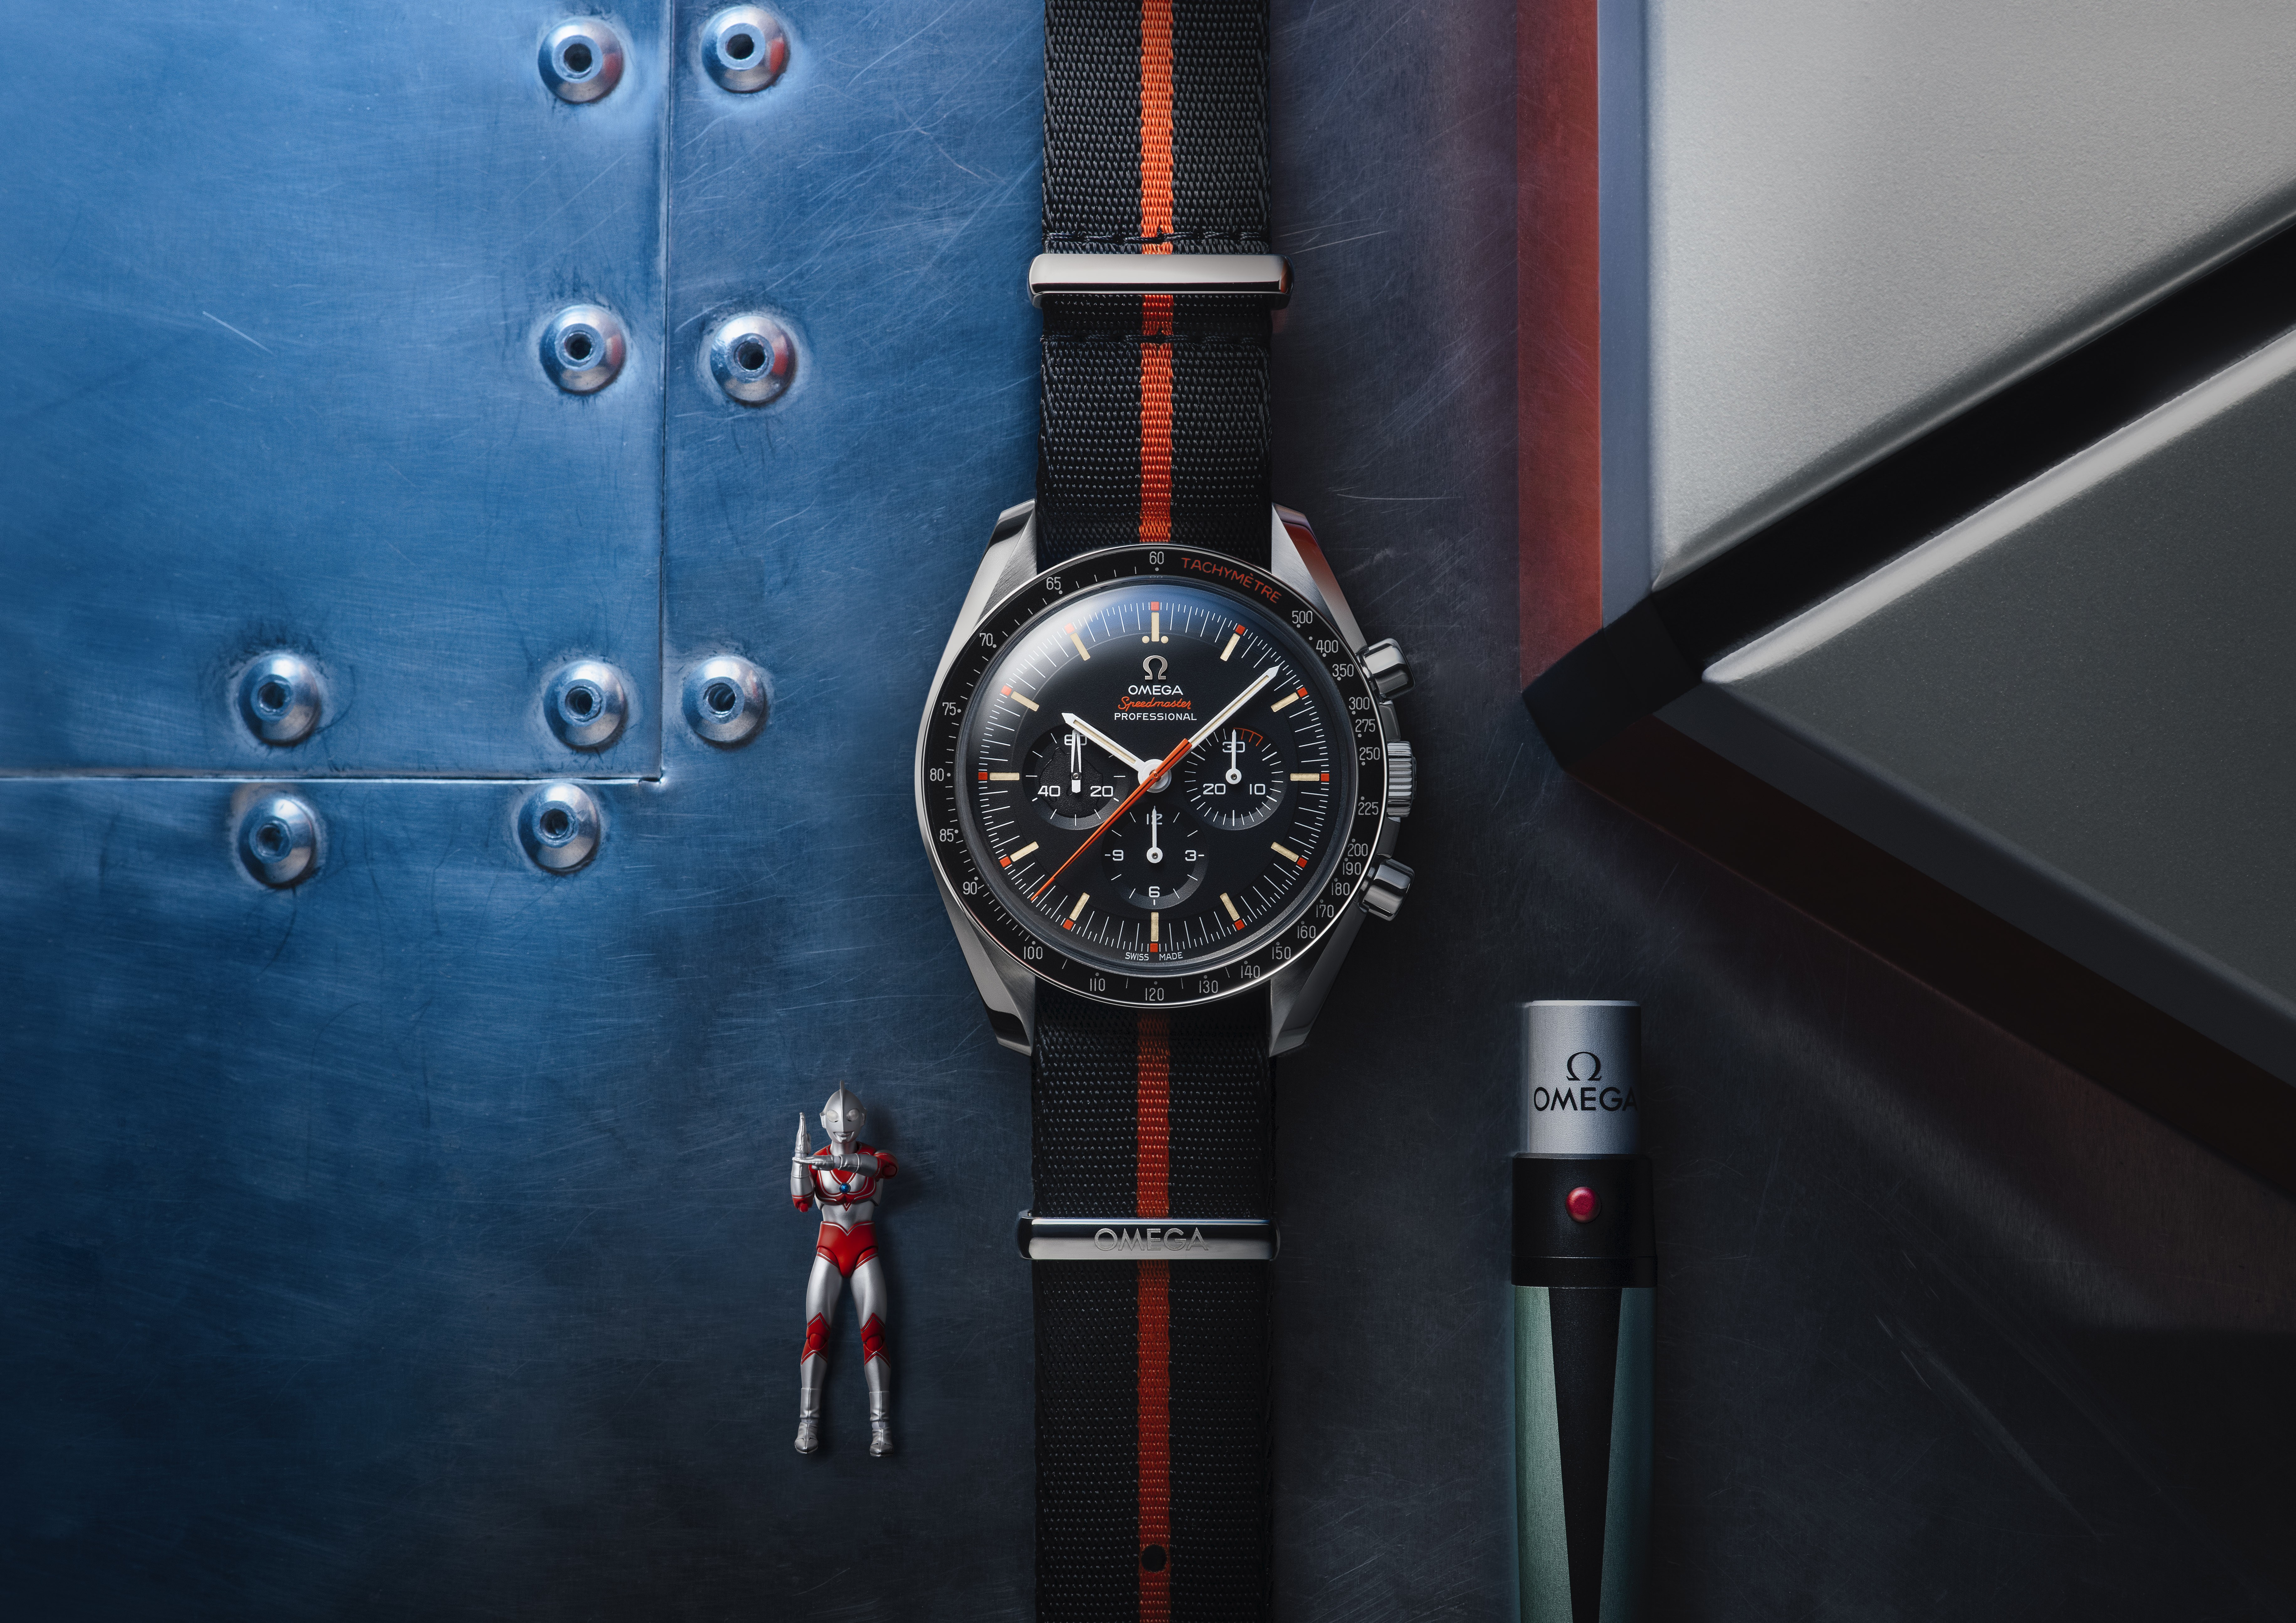 Omega released its Speedmaster Limited Edition 42mm ‘Ultraman’ timepiece on July 10.